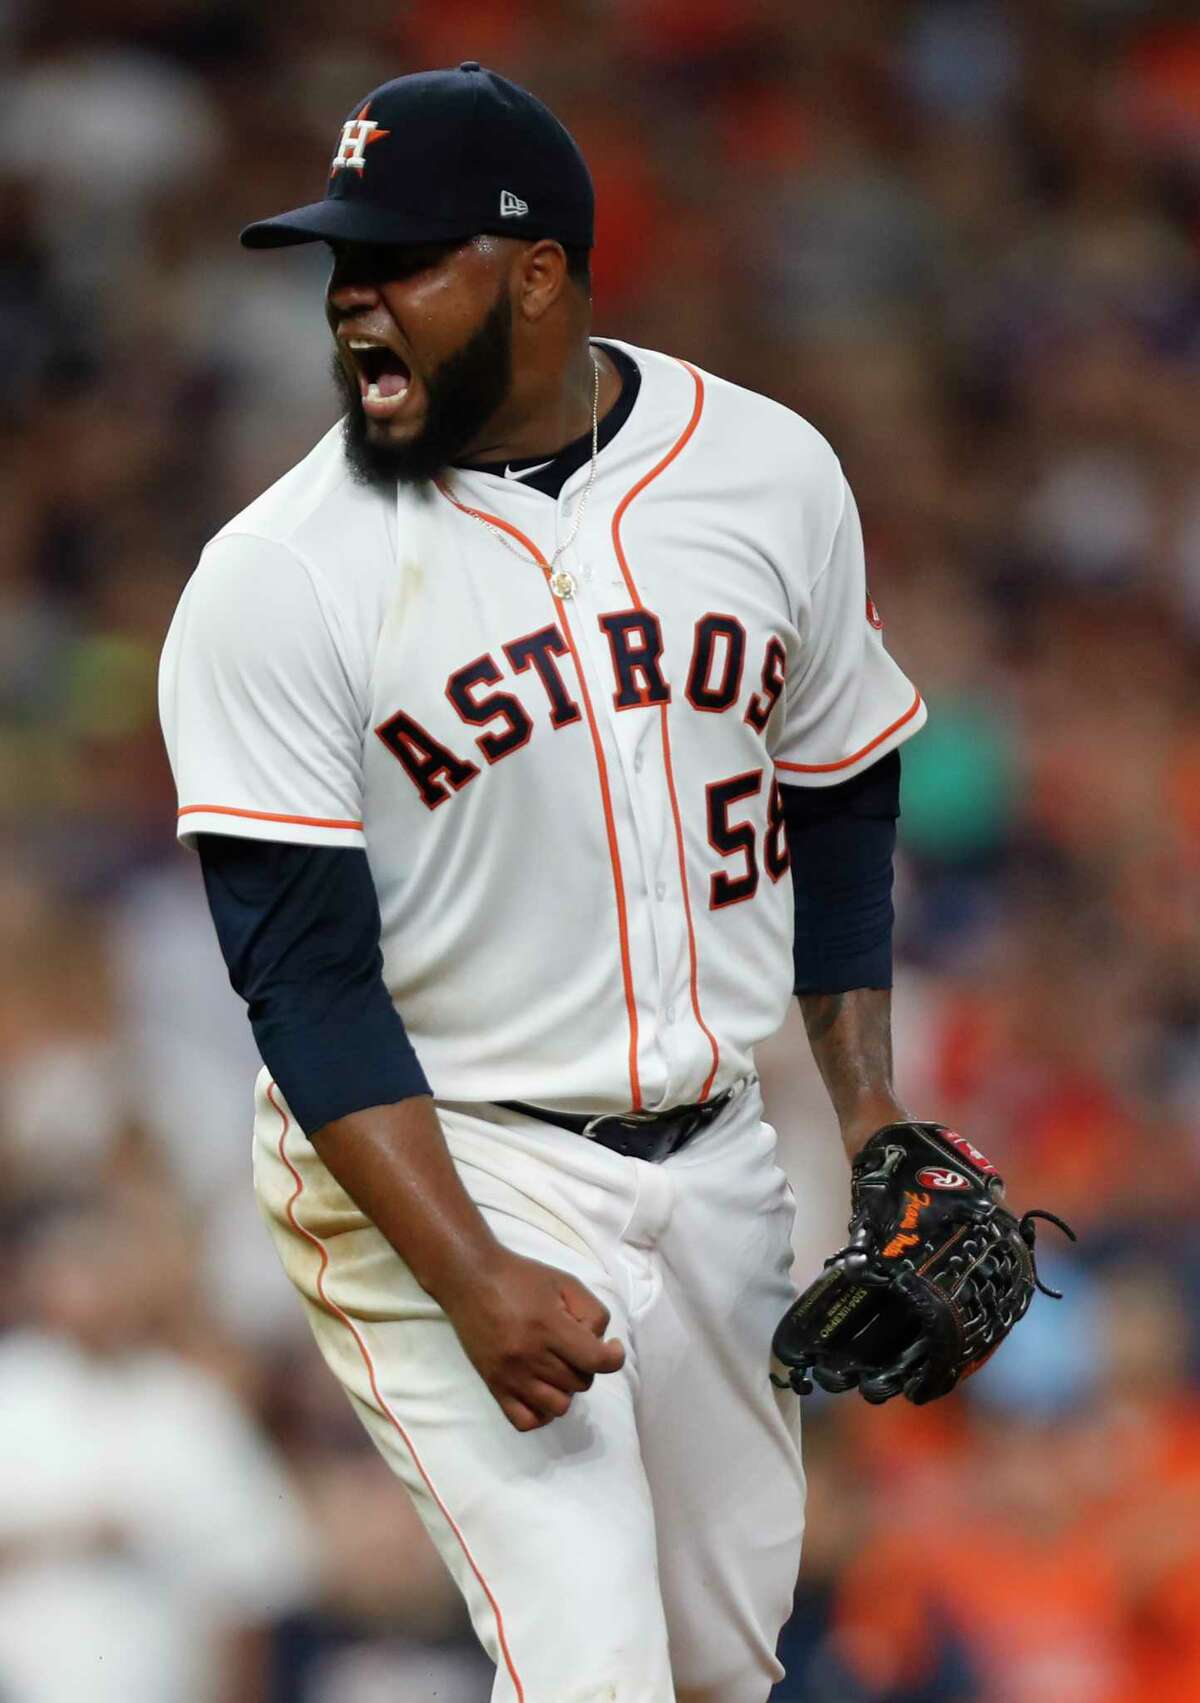 Astros rookie Francis Martes had cause to get excited last week against the Rangers, whom he beat in his first big league start.